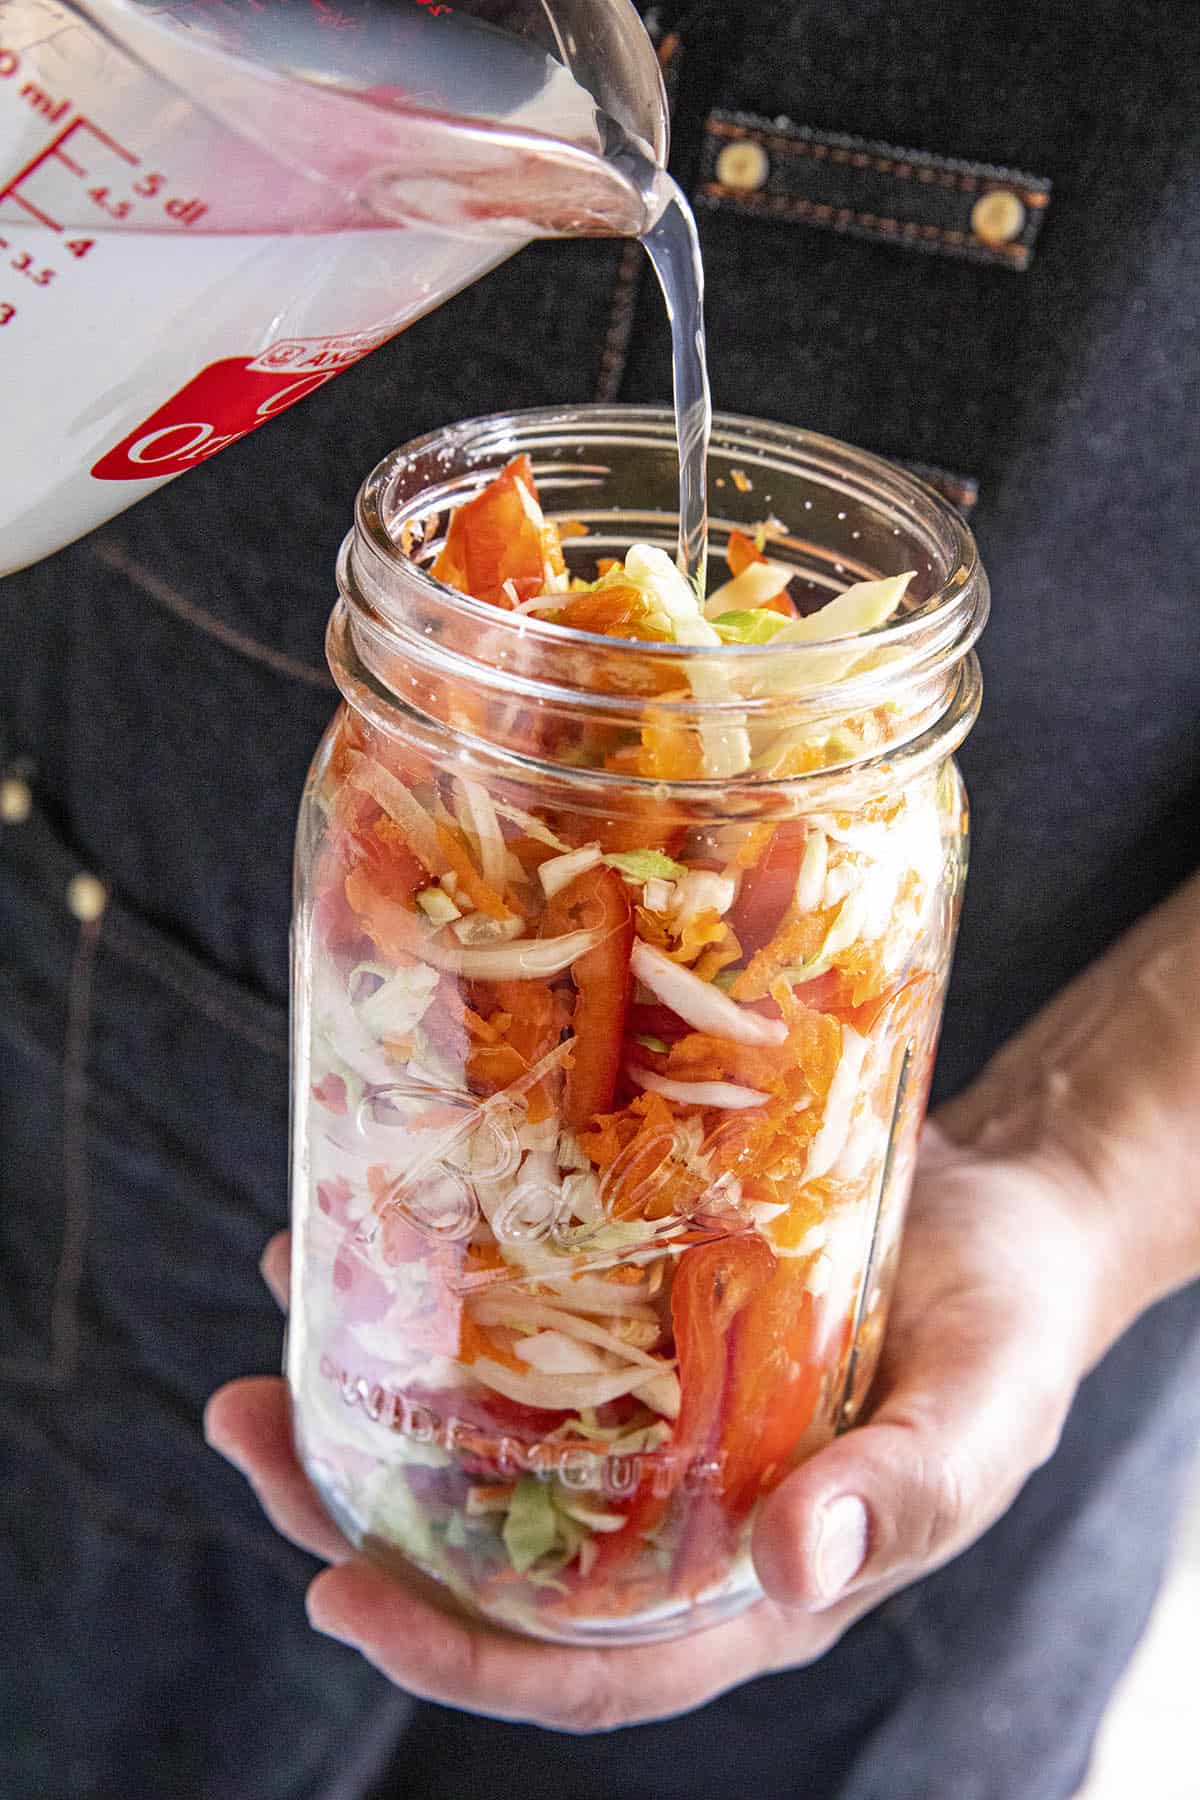 Pouring the brine into the jar of vegetables to make Pikliz